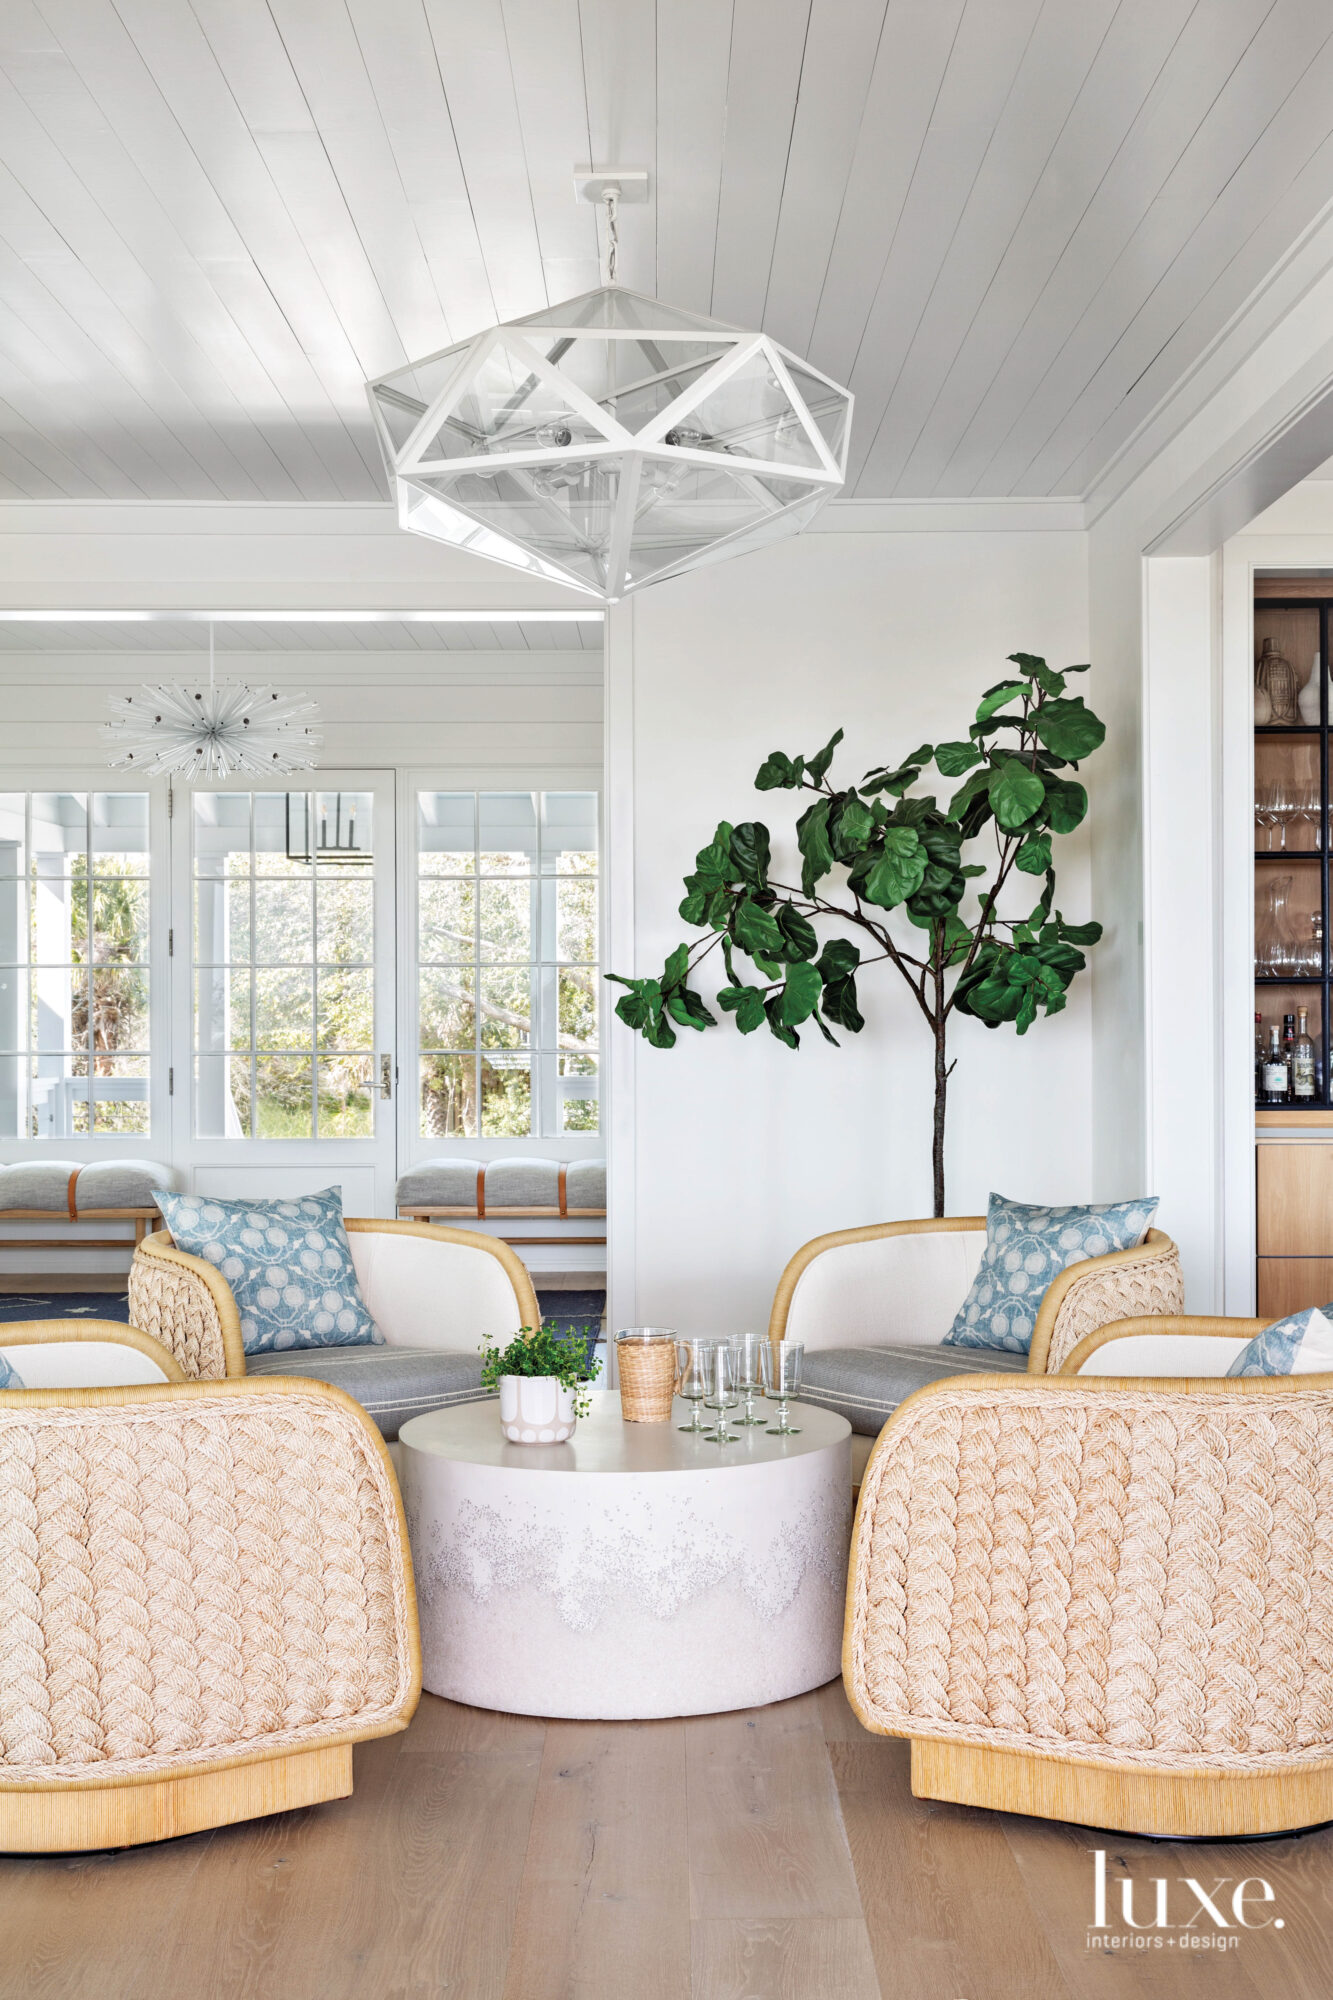 Sitting area with four chairs, drum cocktail table, fiddle leaf fig tree, pendant, bank of windows beyond